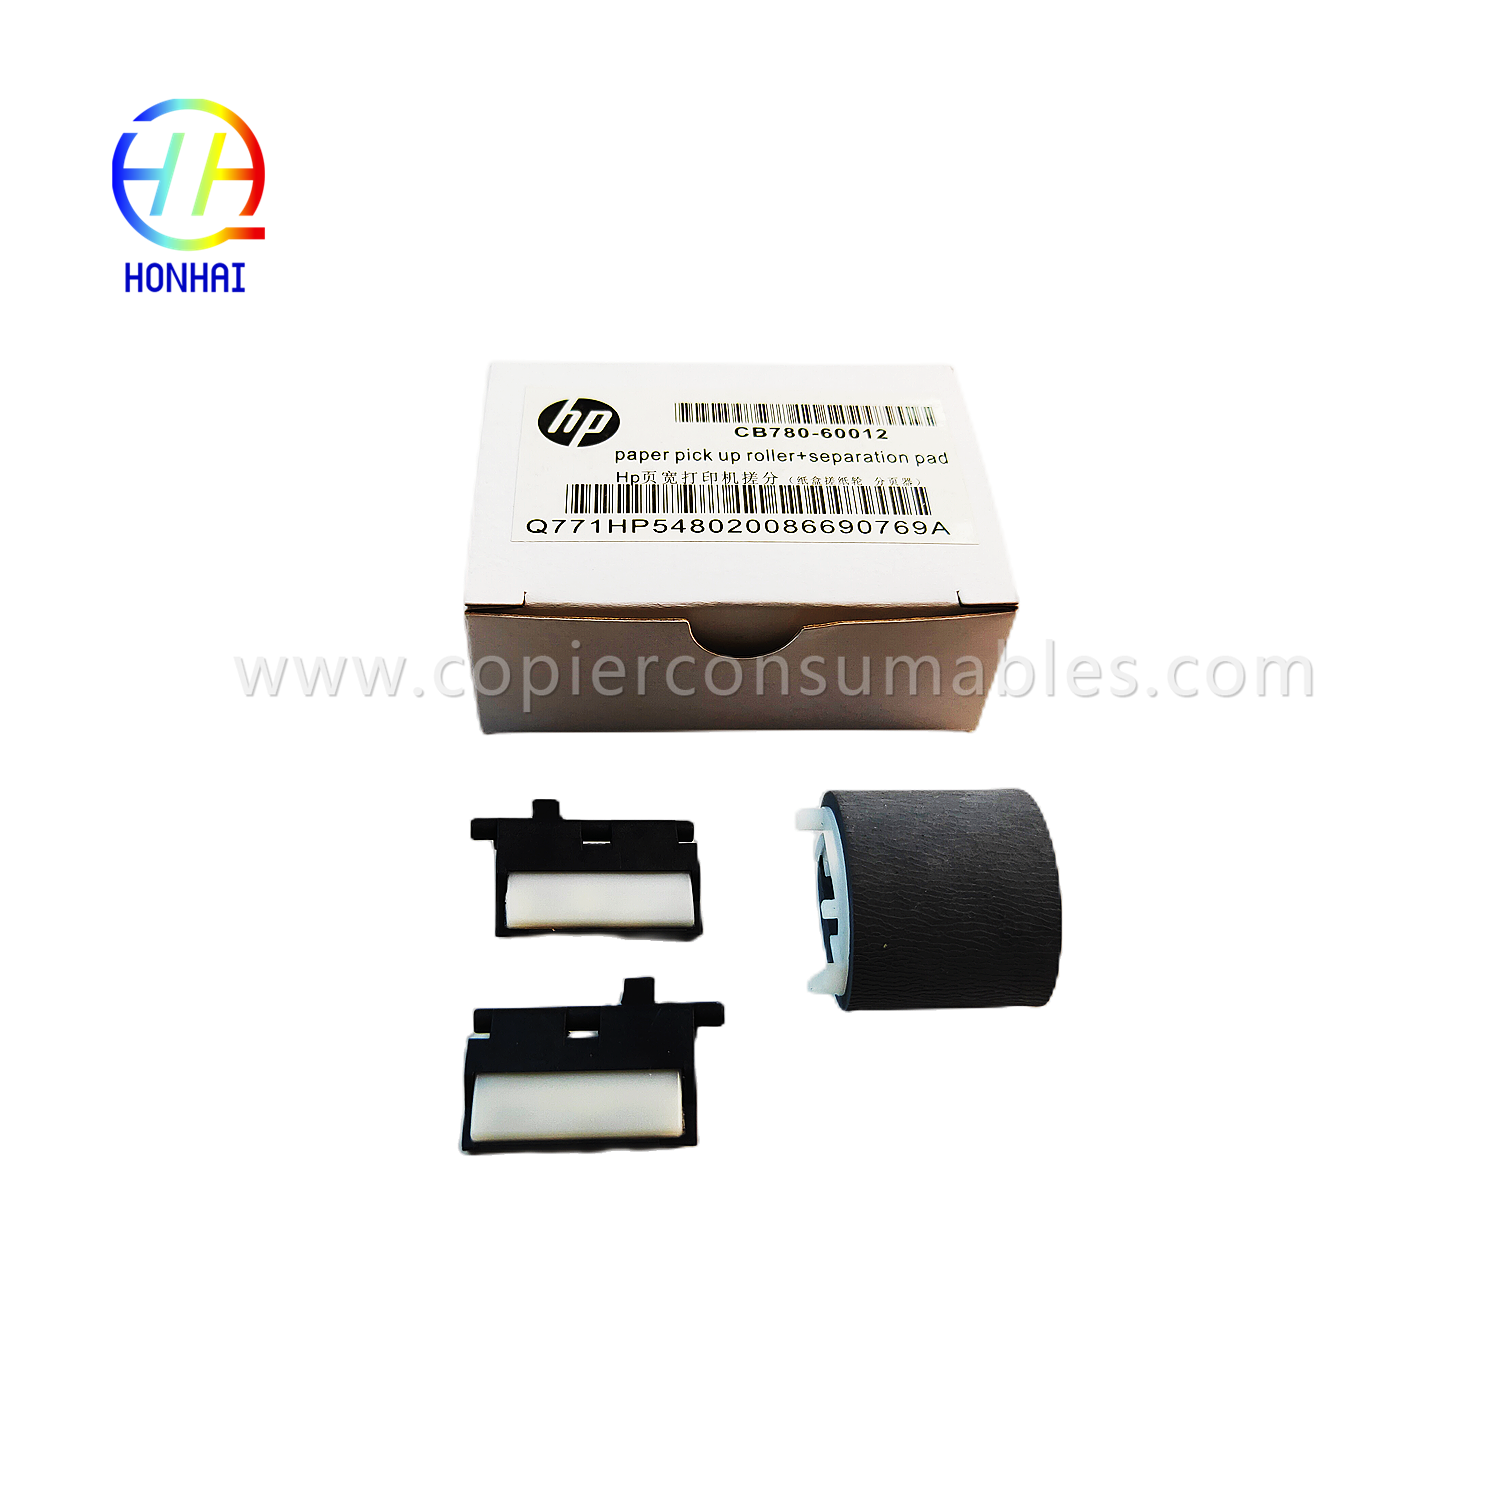 https://www.copierconsumables.com/paper-pickup-roller-separates-pad%ef%bc%88set%ef%bc%89for-hp-pagewide-x585z-x451dn-x476dn-x551dw-x576dw-556dn-586-452dn-477dn-552-577z-cb780-60012-product/